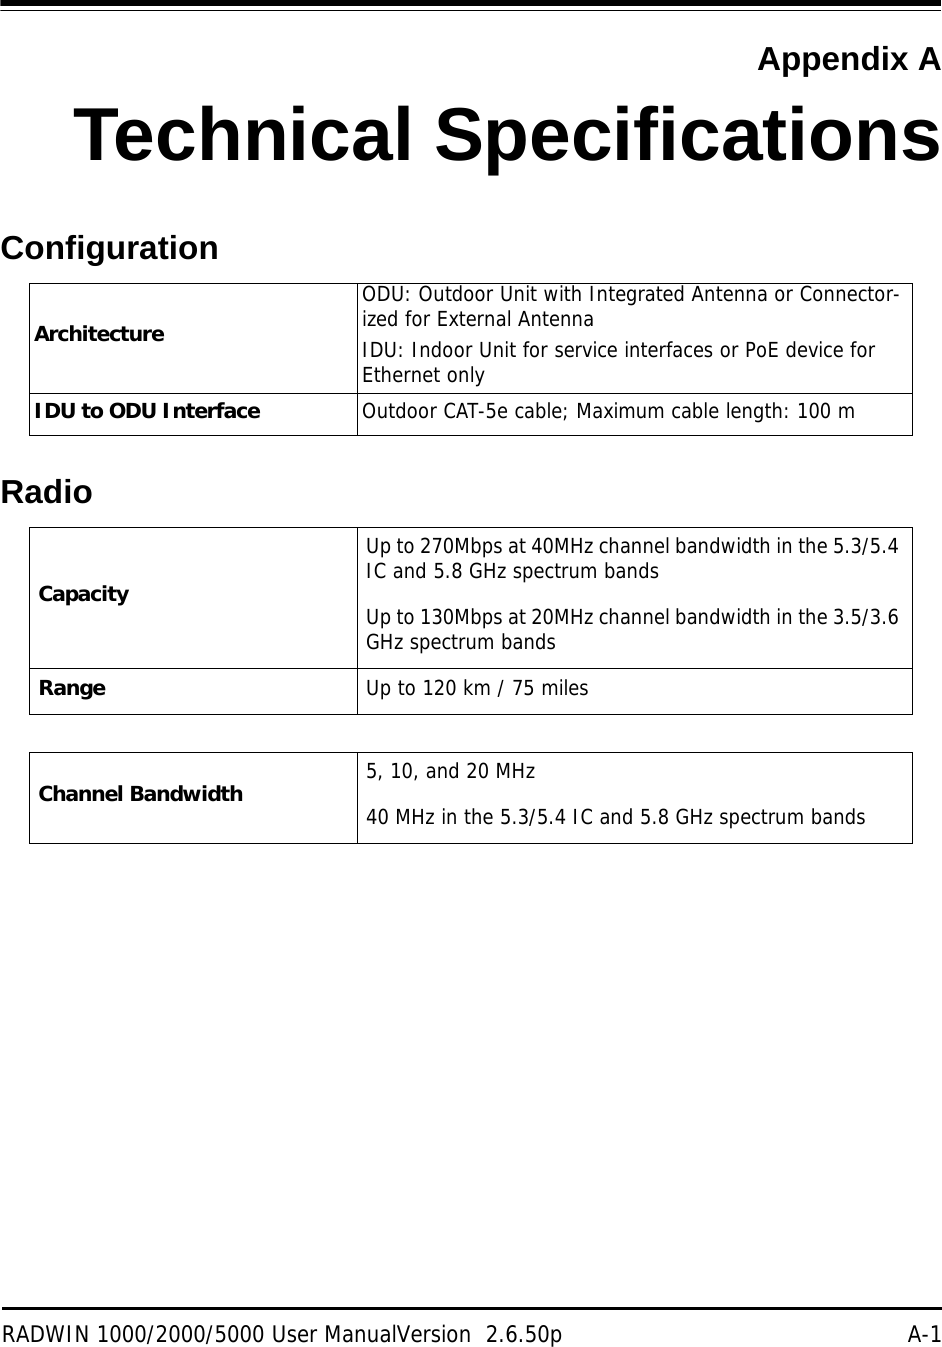 RADWIN 1000/2000/5000 User ManualVersion  2.6.50p A-1Appendix ATechnical SpecificationsConfigurationRadioArchitectureODU: Outdoor Unit with Integrated Antenna or Connector-ized for External AntennaIDU: Indoor Unit for service interfaces or PoE device for Ethernet onlyIDU to ODU Interface Outdoor CAT-5e cable; Maximum cable length: 100 mCapacityUp to 270Mbps at 40MHz channel bandwidth in the 5.3/5.4 IC and 5.8 GHz spectrum bandsUp to 130Mbps at 20MHz channel bandwidth in the 3.5/3.6 GHz spectrum bandsRange Up to 120 km / 75 milesChannel Bandwidth 5, 10, and 20 MHz40 MHz in the 5.3/5.4 IC and 5.8 GHz spectrum bands